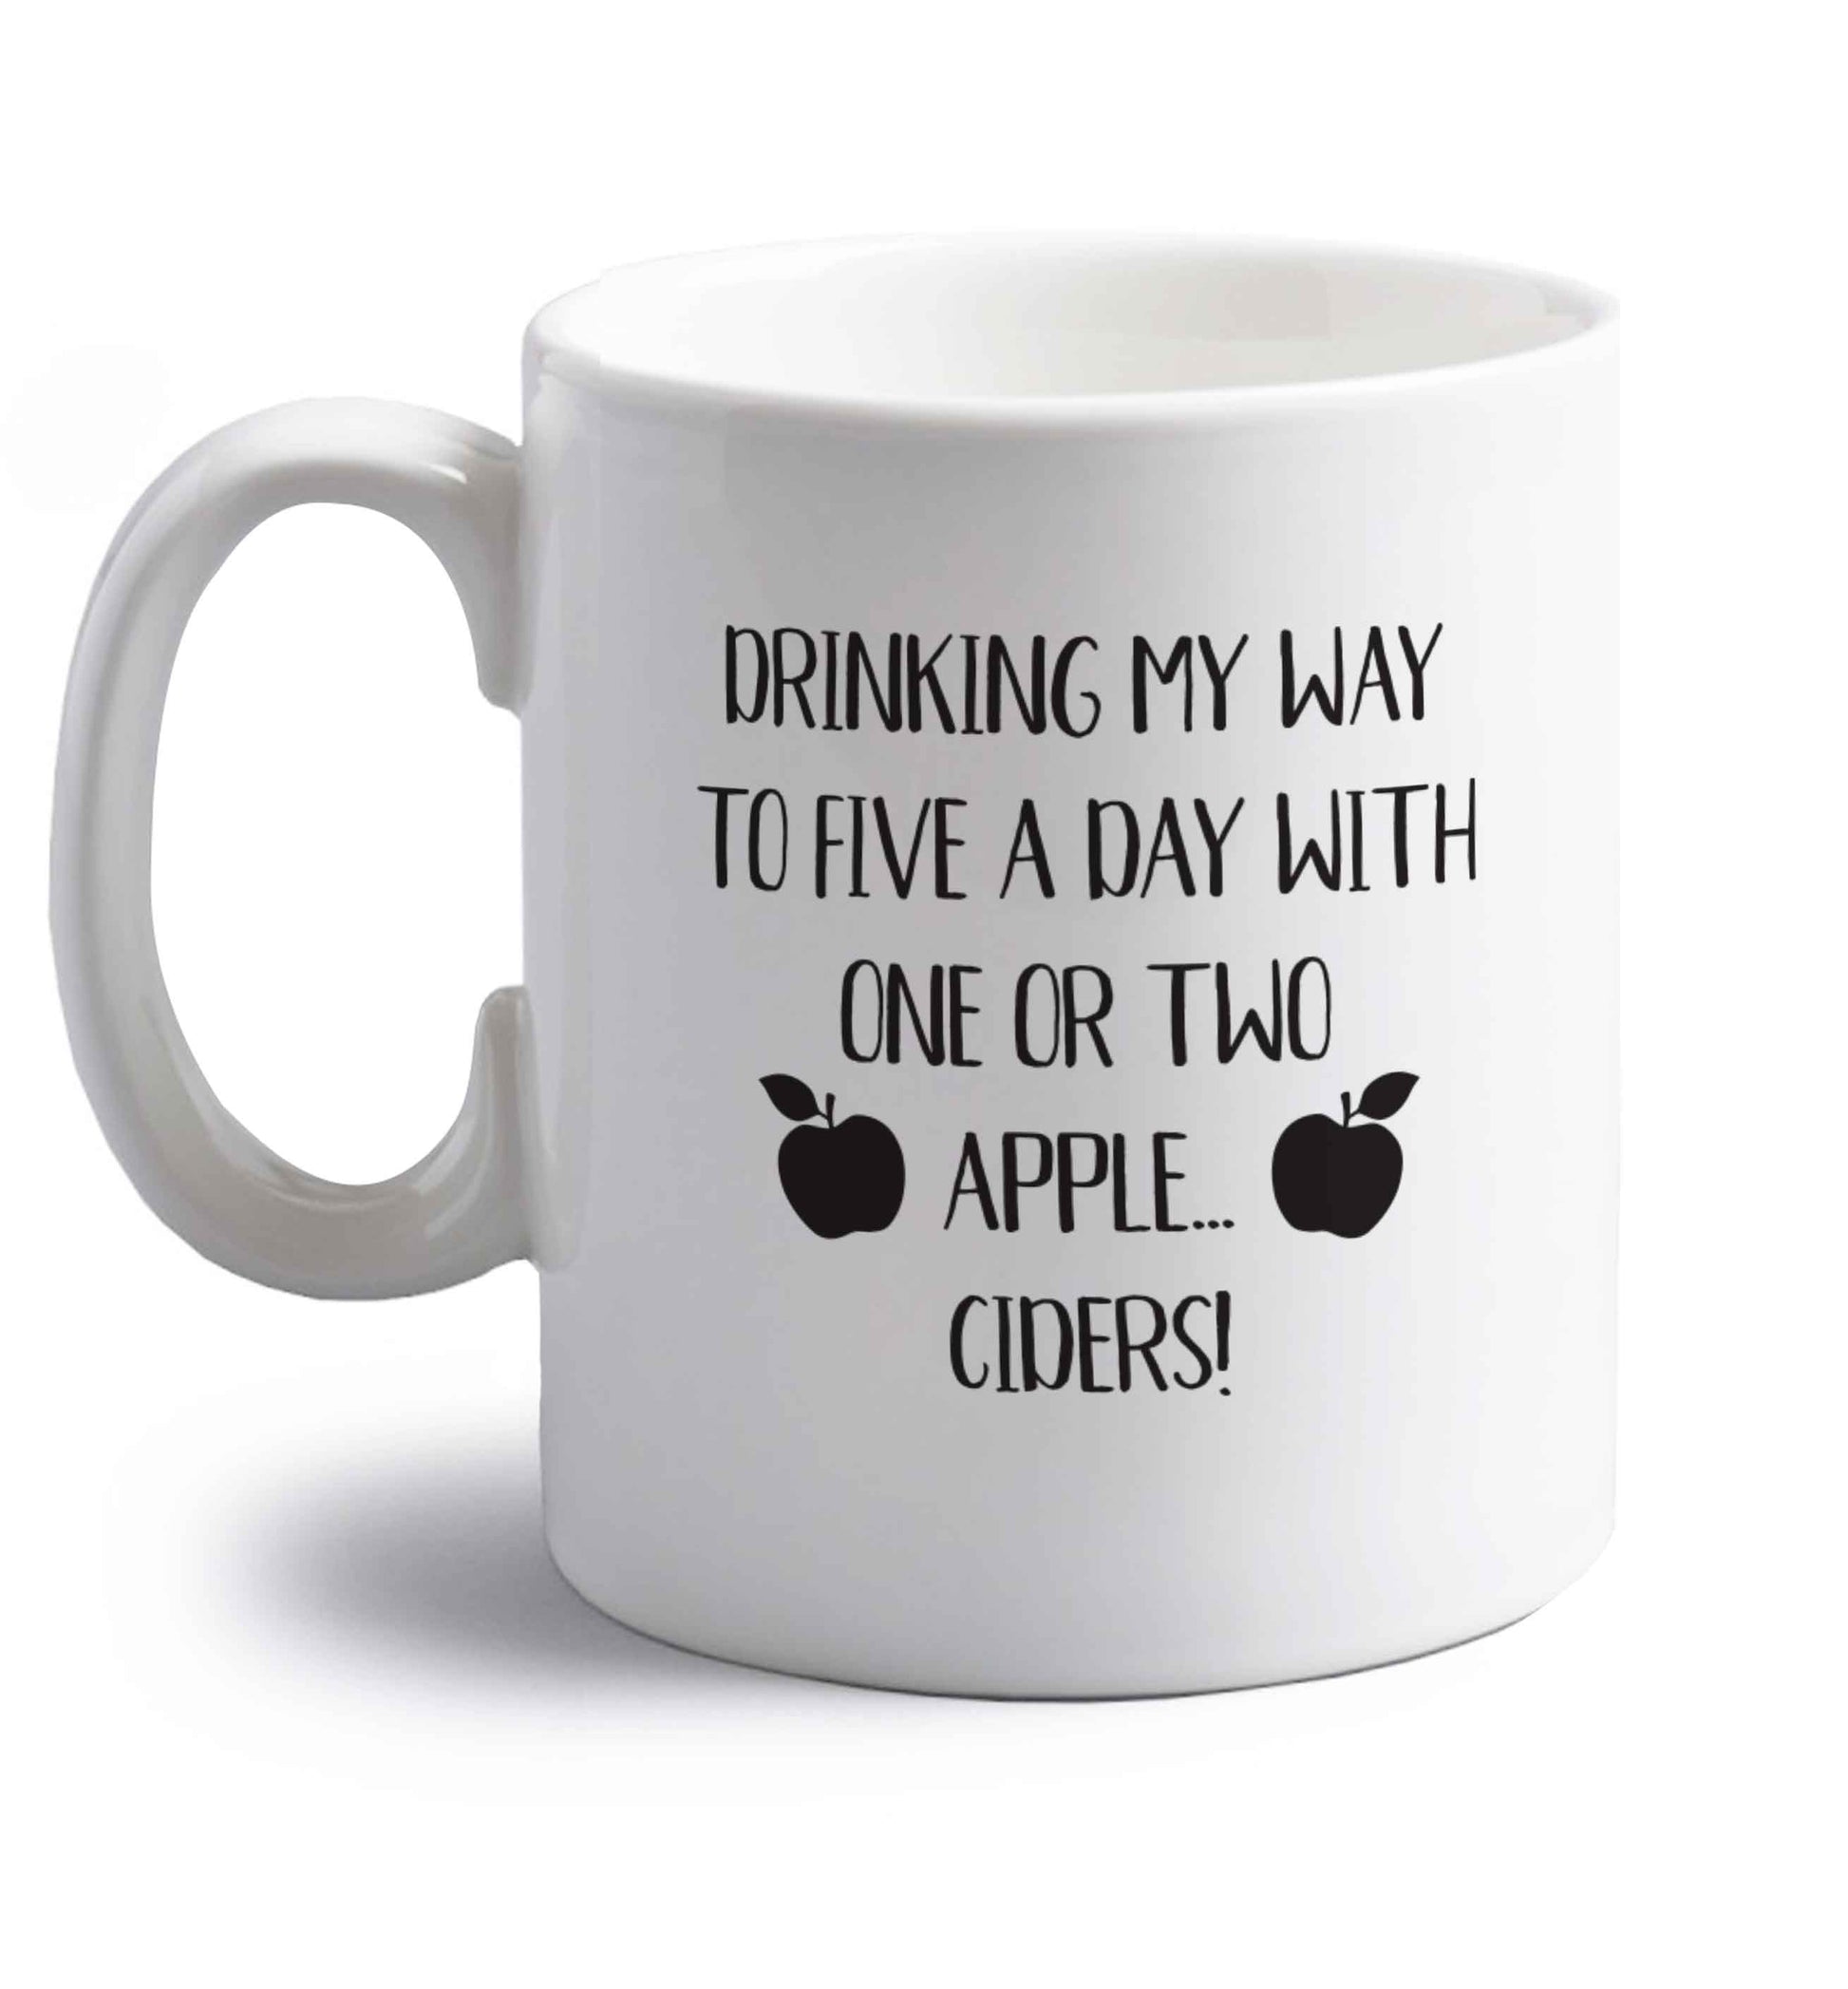 Drinking my way to five a day with one or two apple ciders right handed white ceramic mug 